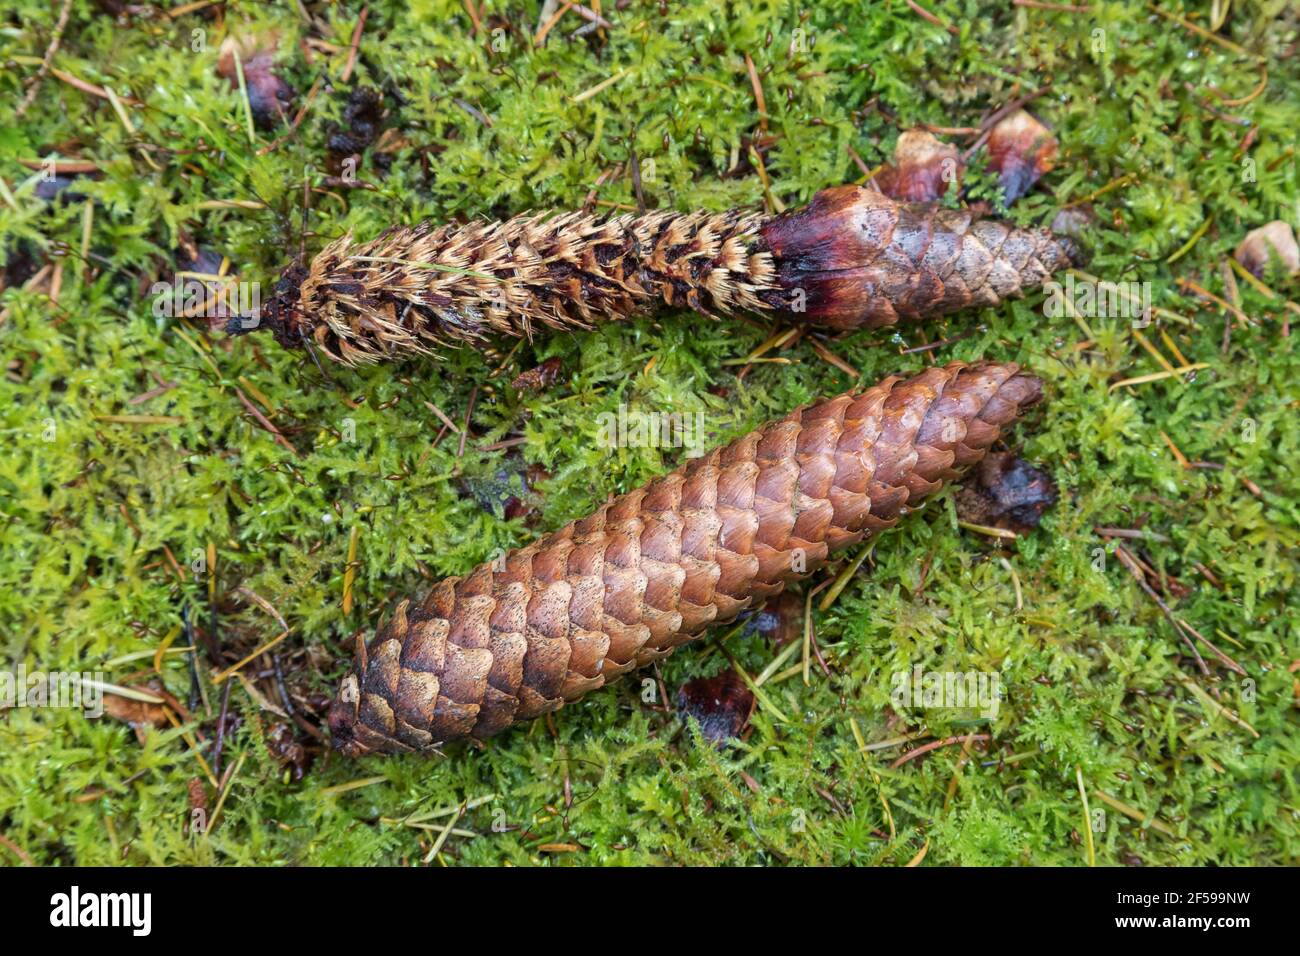 Norway spruce cones (Picea abies) showing one eaten by red squirrel (Sciurus vulgaris), Kielder Forest, Northumberland, UK Stock Photo